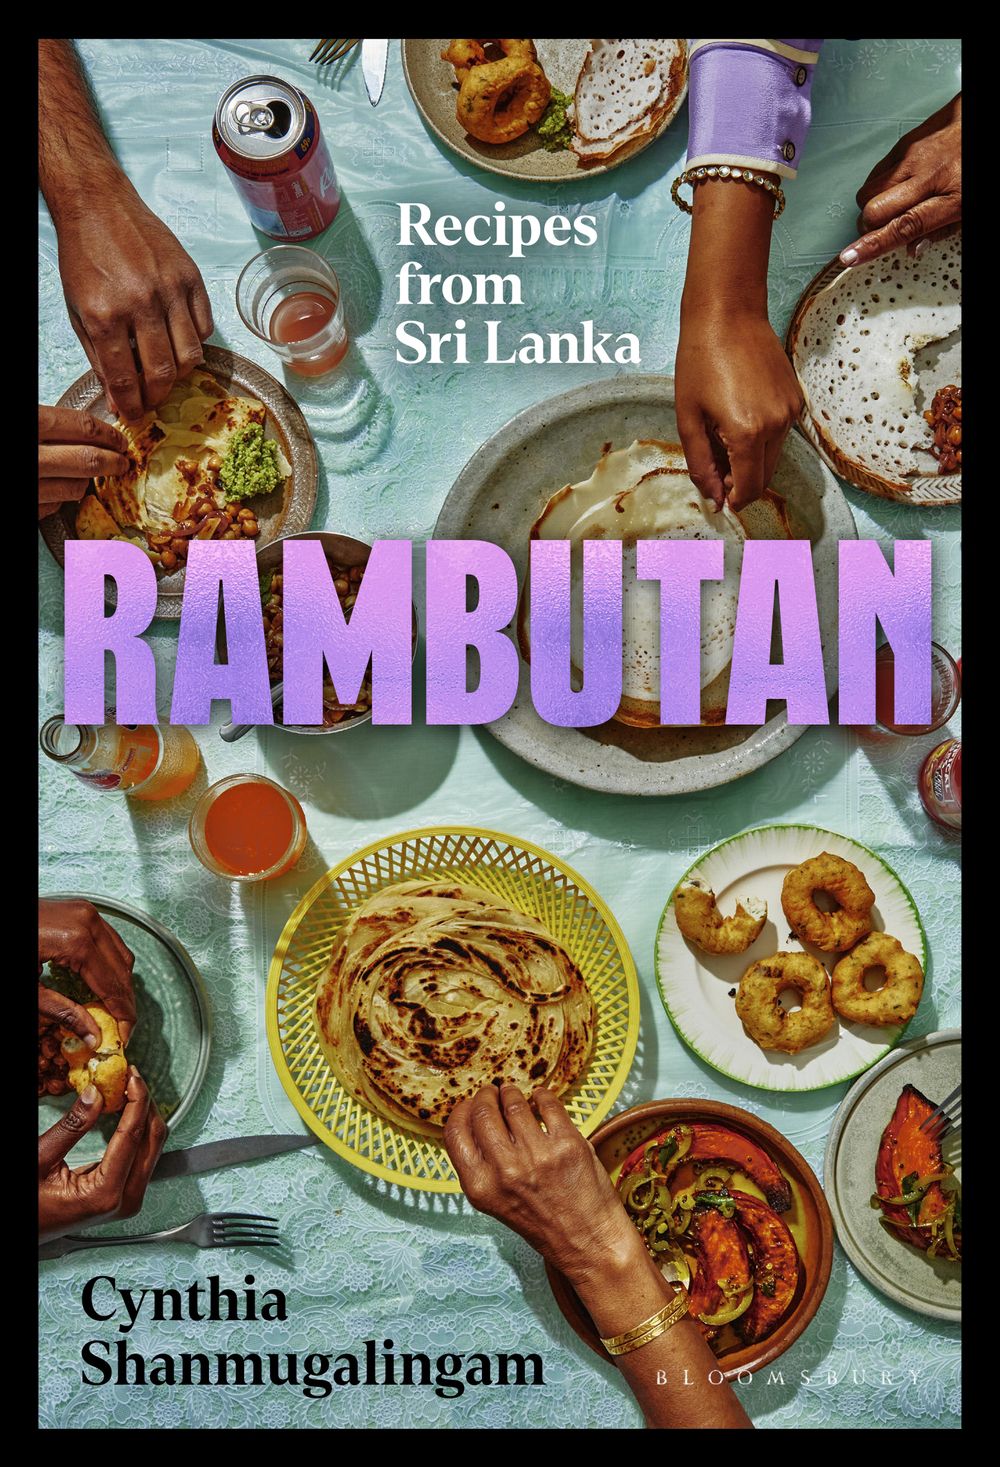 The cover of “Rambutan” featuring a plate of roti and other Sri Lankan dishes